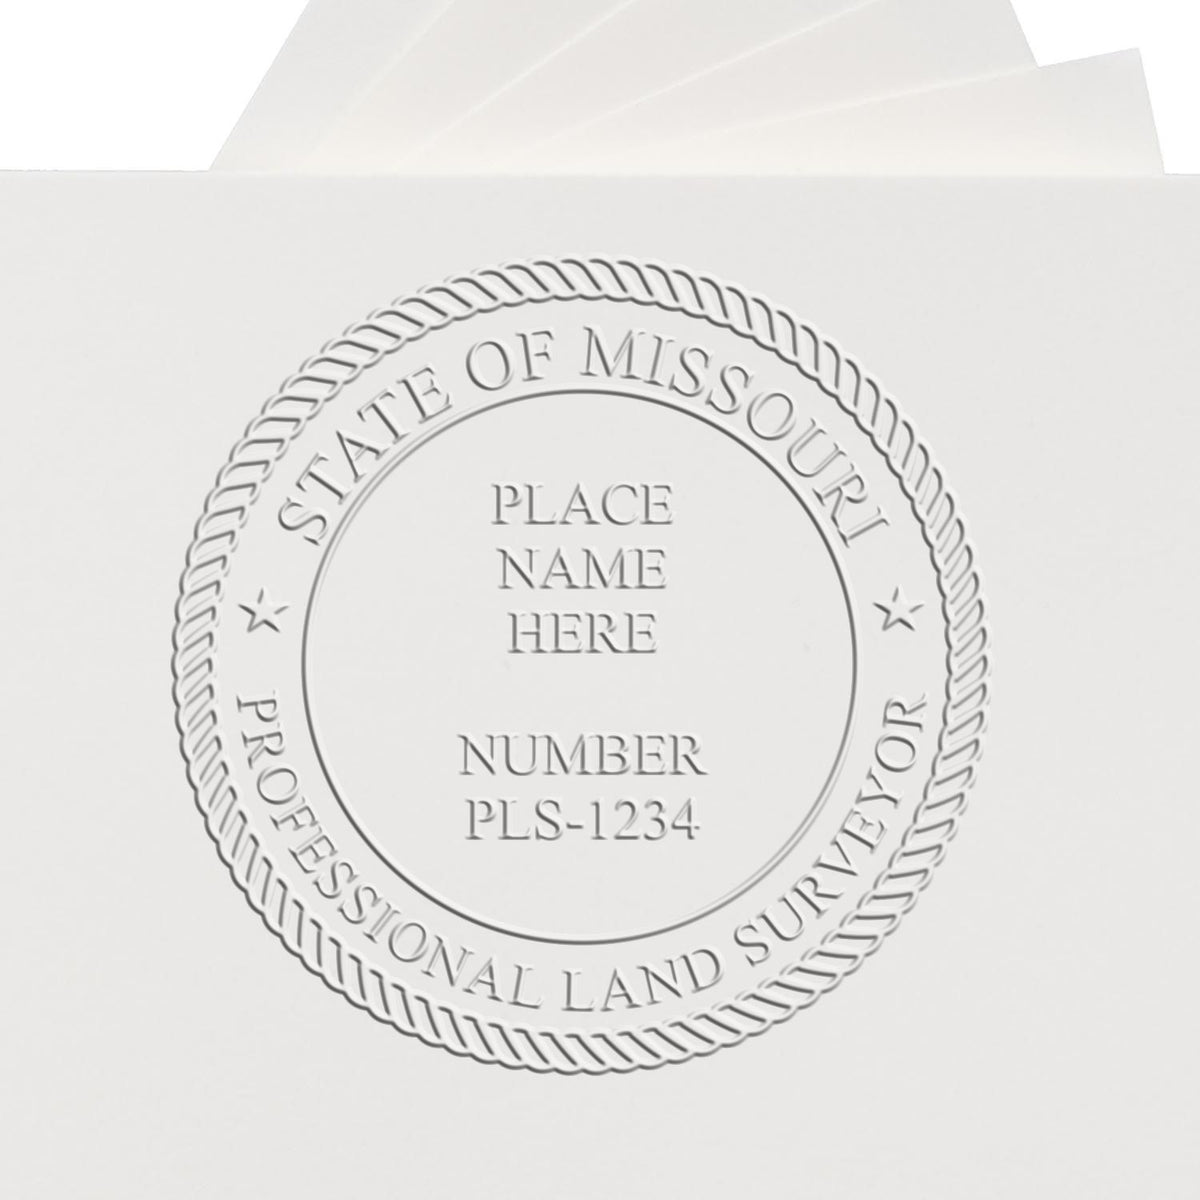 A lifestyle photo showing a stamped image of the State of Missouri Soft Land Surveyor Embossing Seal on a piece of paper